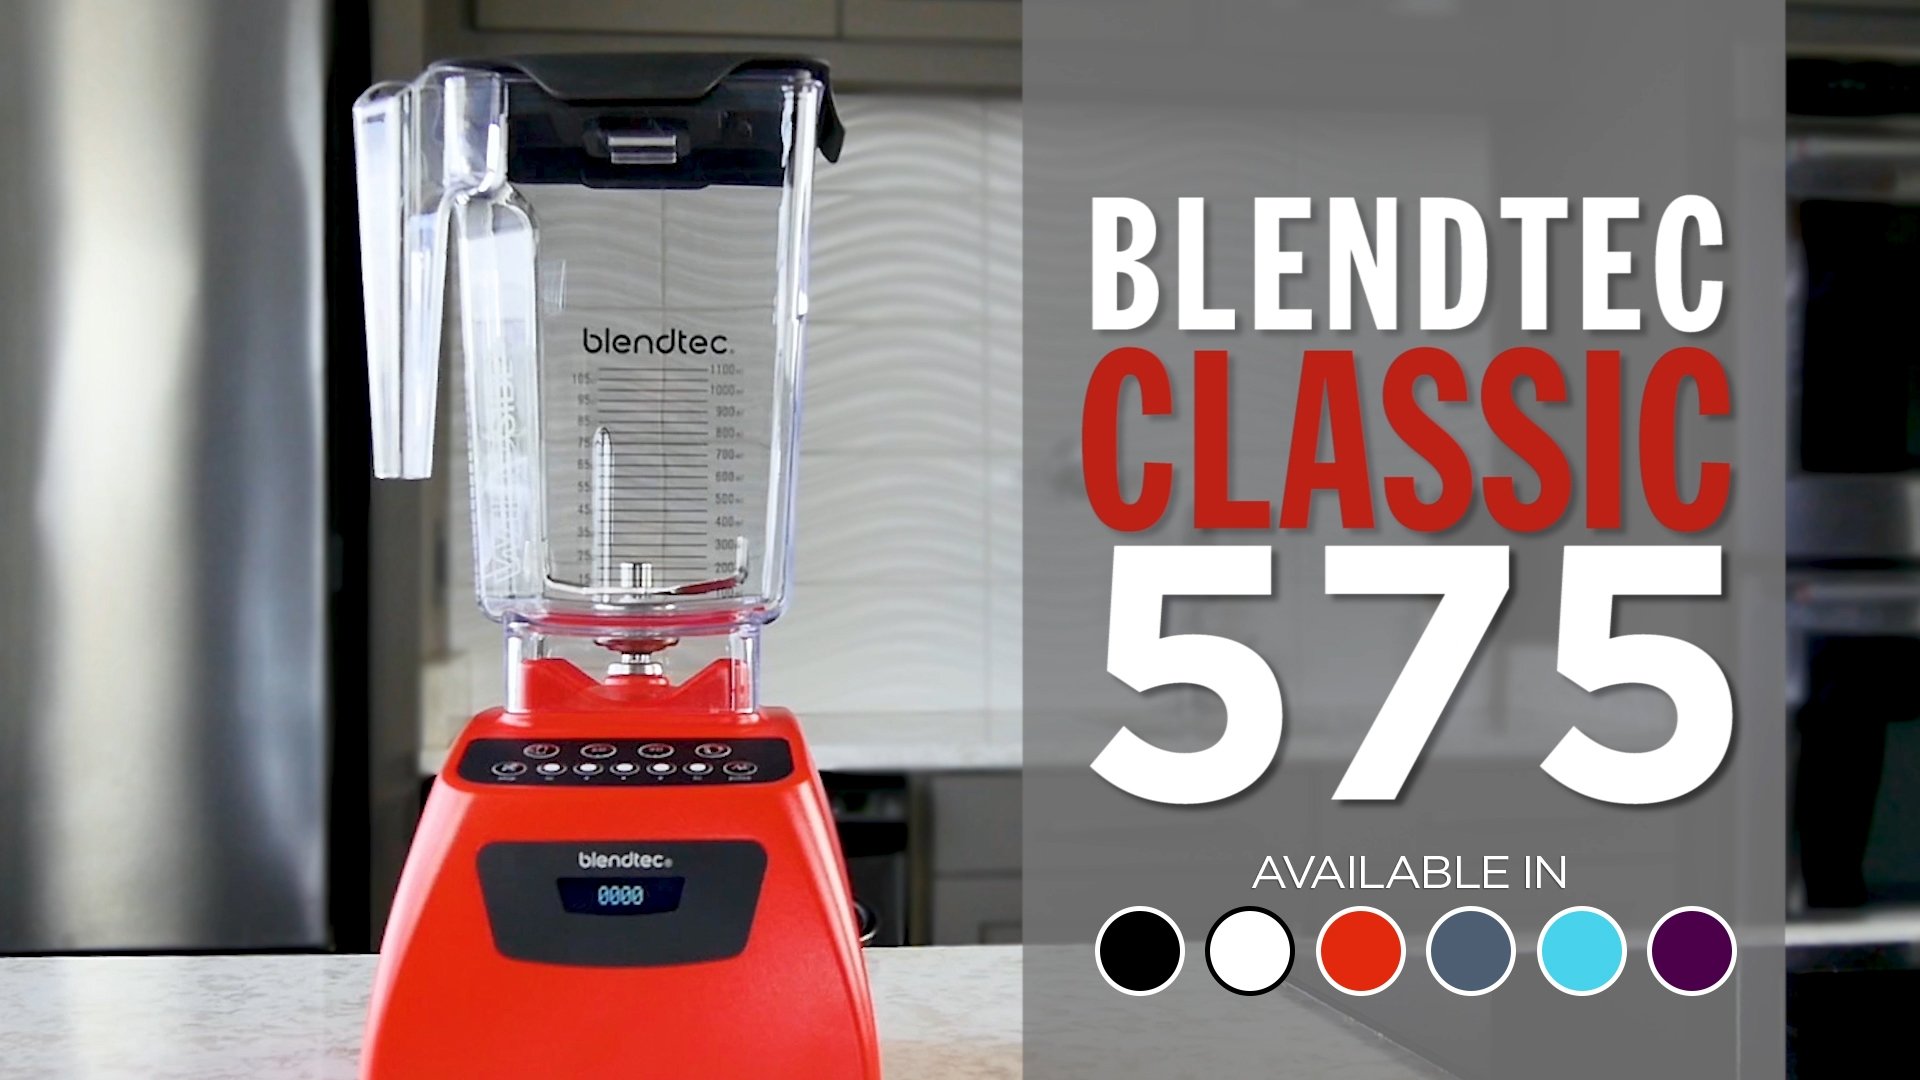 Food Processor vs Blender: What's The Difference Between Them? – Blendtec